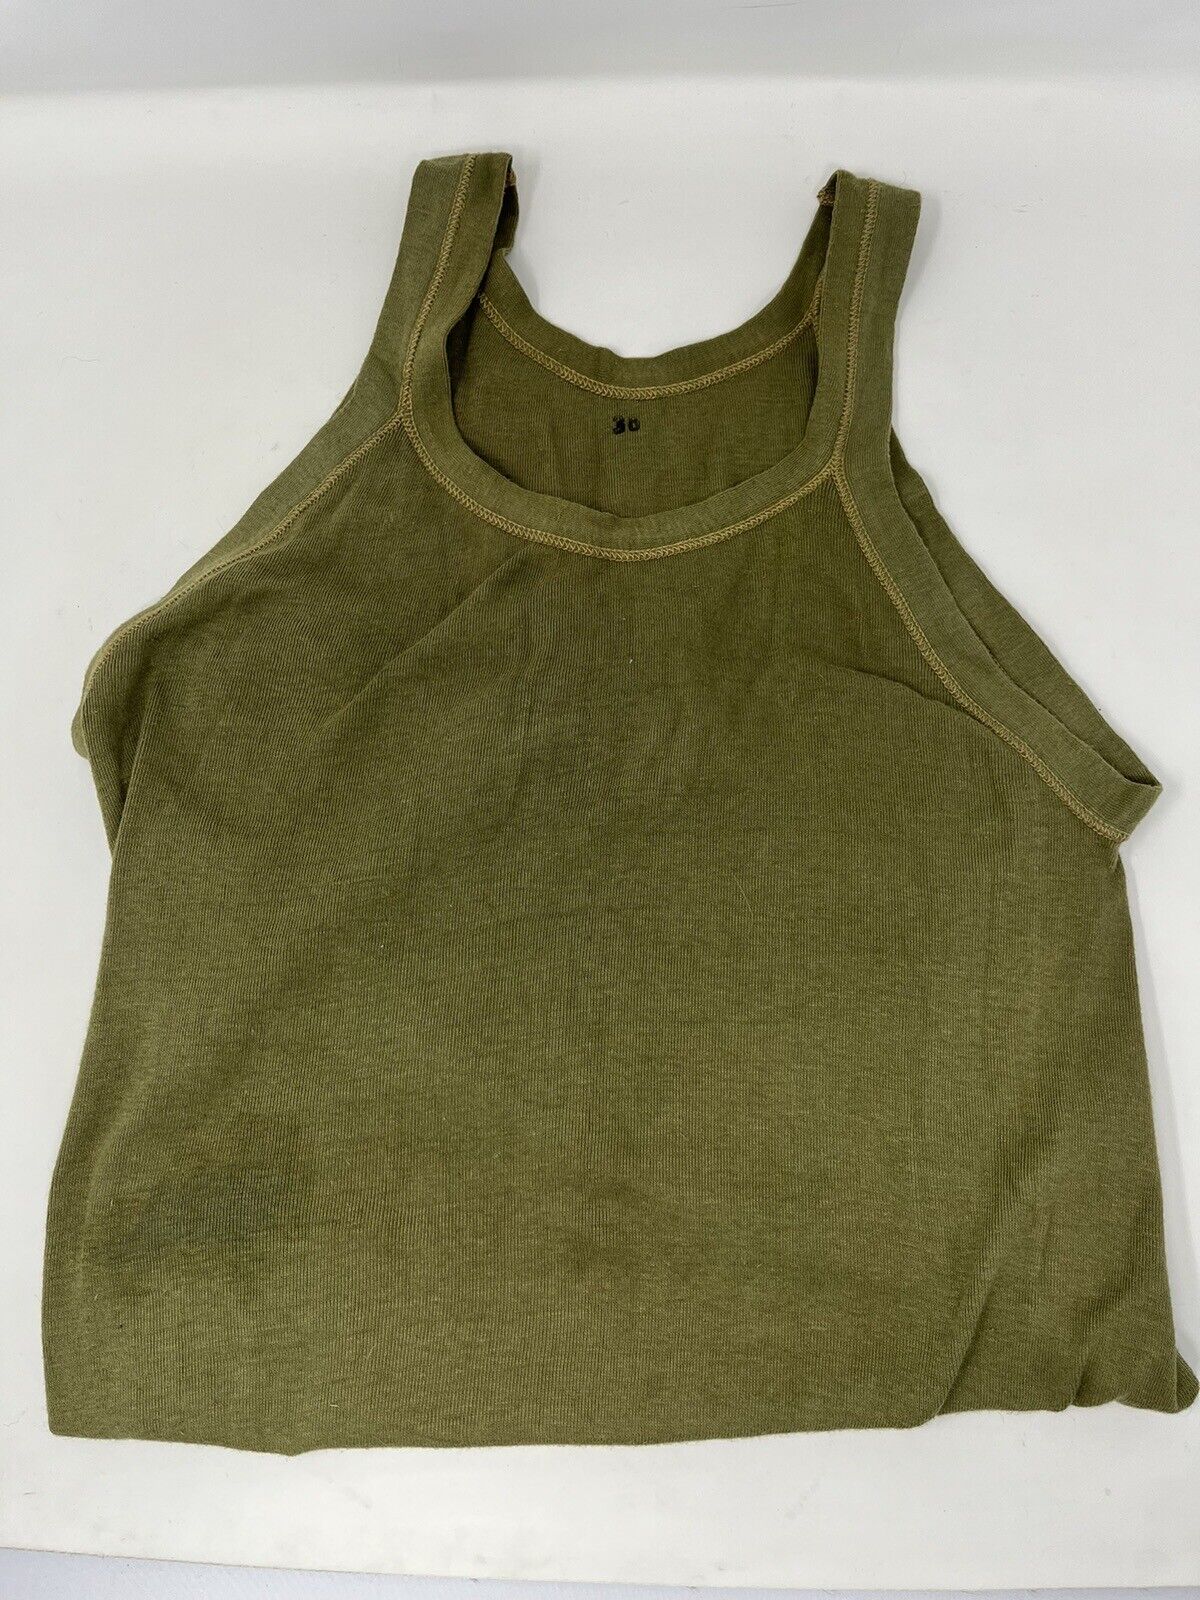 Antique WWII Tank Top, Ribbed Tank Top, Olive Drab, Green, Size 36